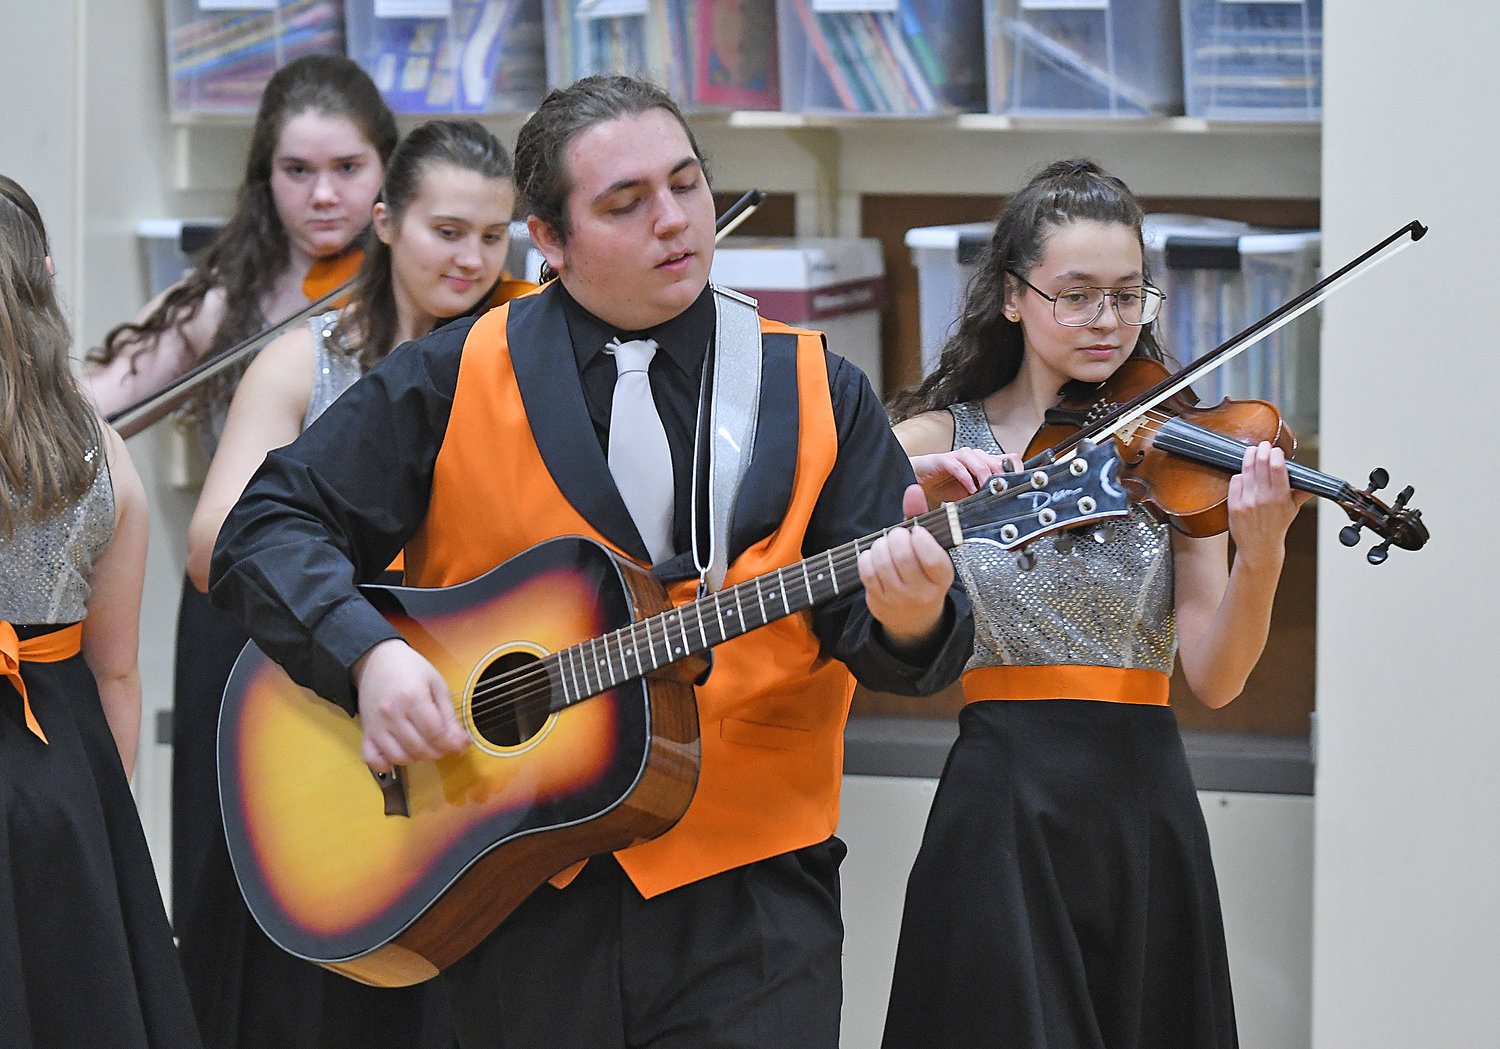 Jake Consentino plays the guitar during Rome Free Academy Rhapsody Show Choir performance Friday, Jan. 13 at Clough School in Rome.